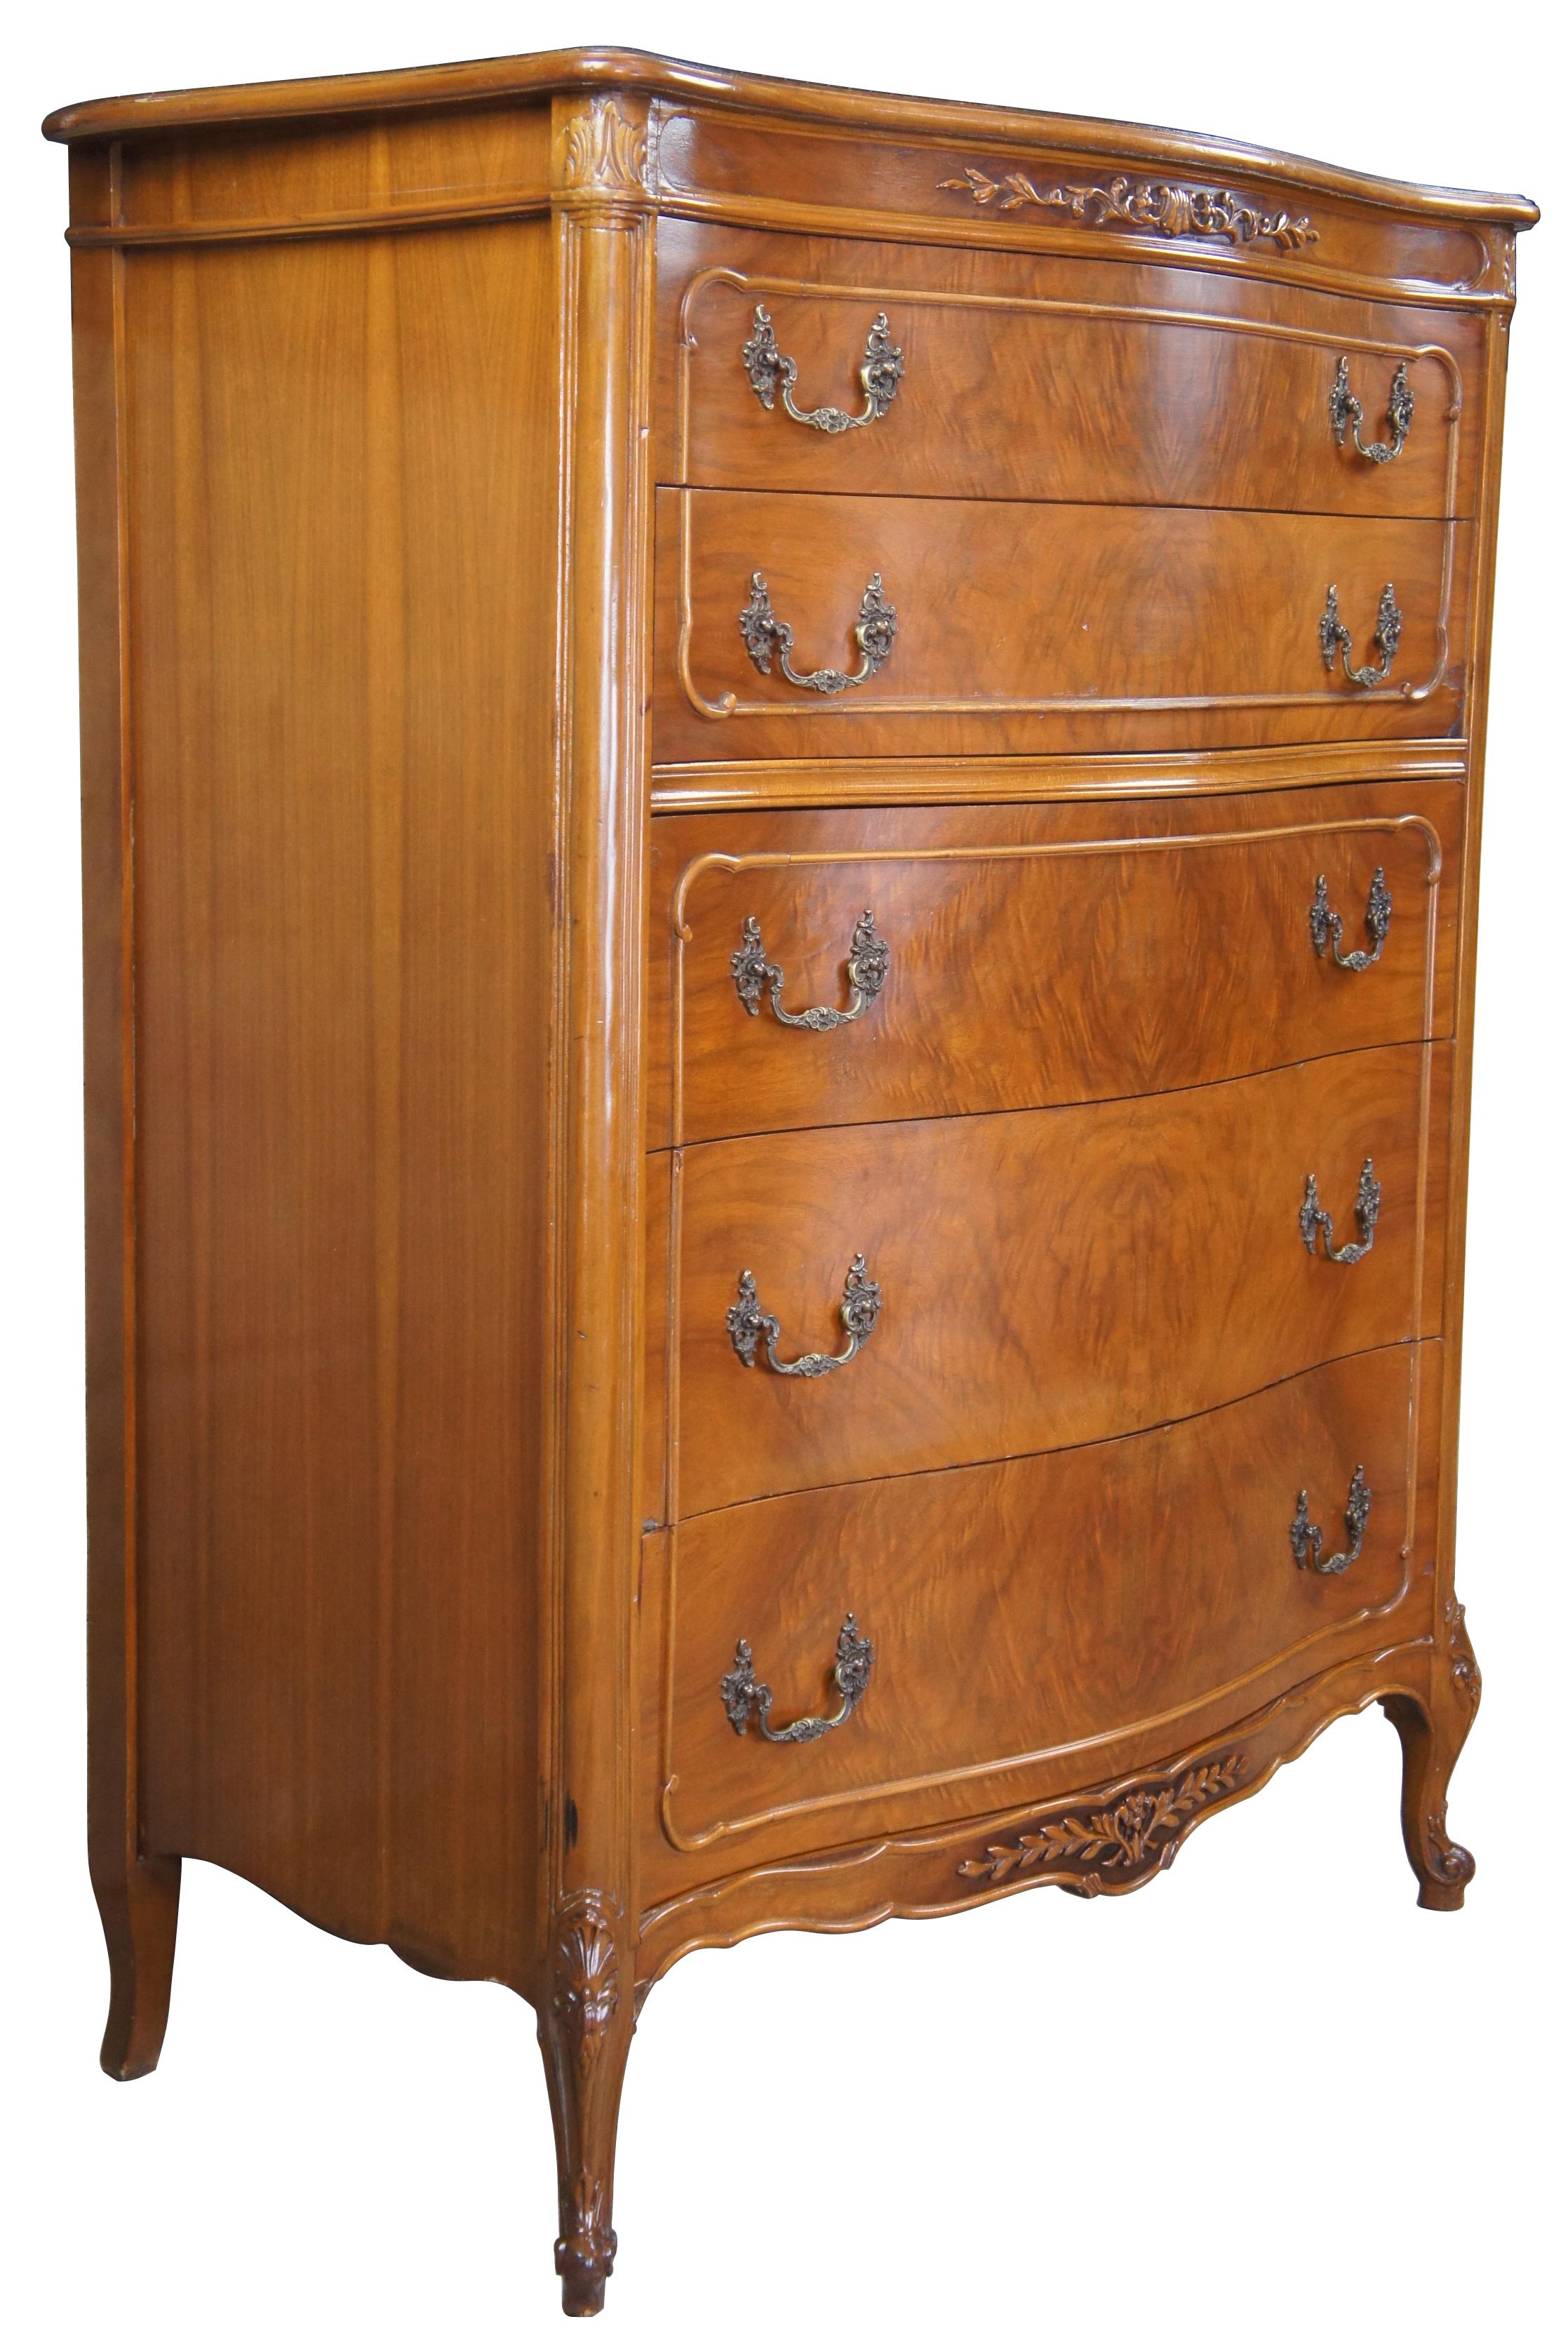 Circa 1940s French tallboy dresser or chest of drawers. Made from walnut with a serpentine front and crotch veneered drawers. Features carved accents, scalloped brass hardware, cabriole legs and glass top (not pictured).
   